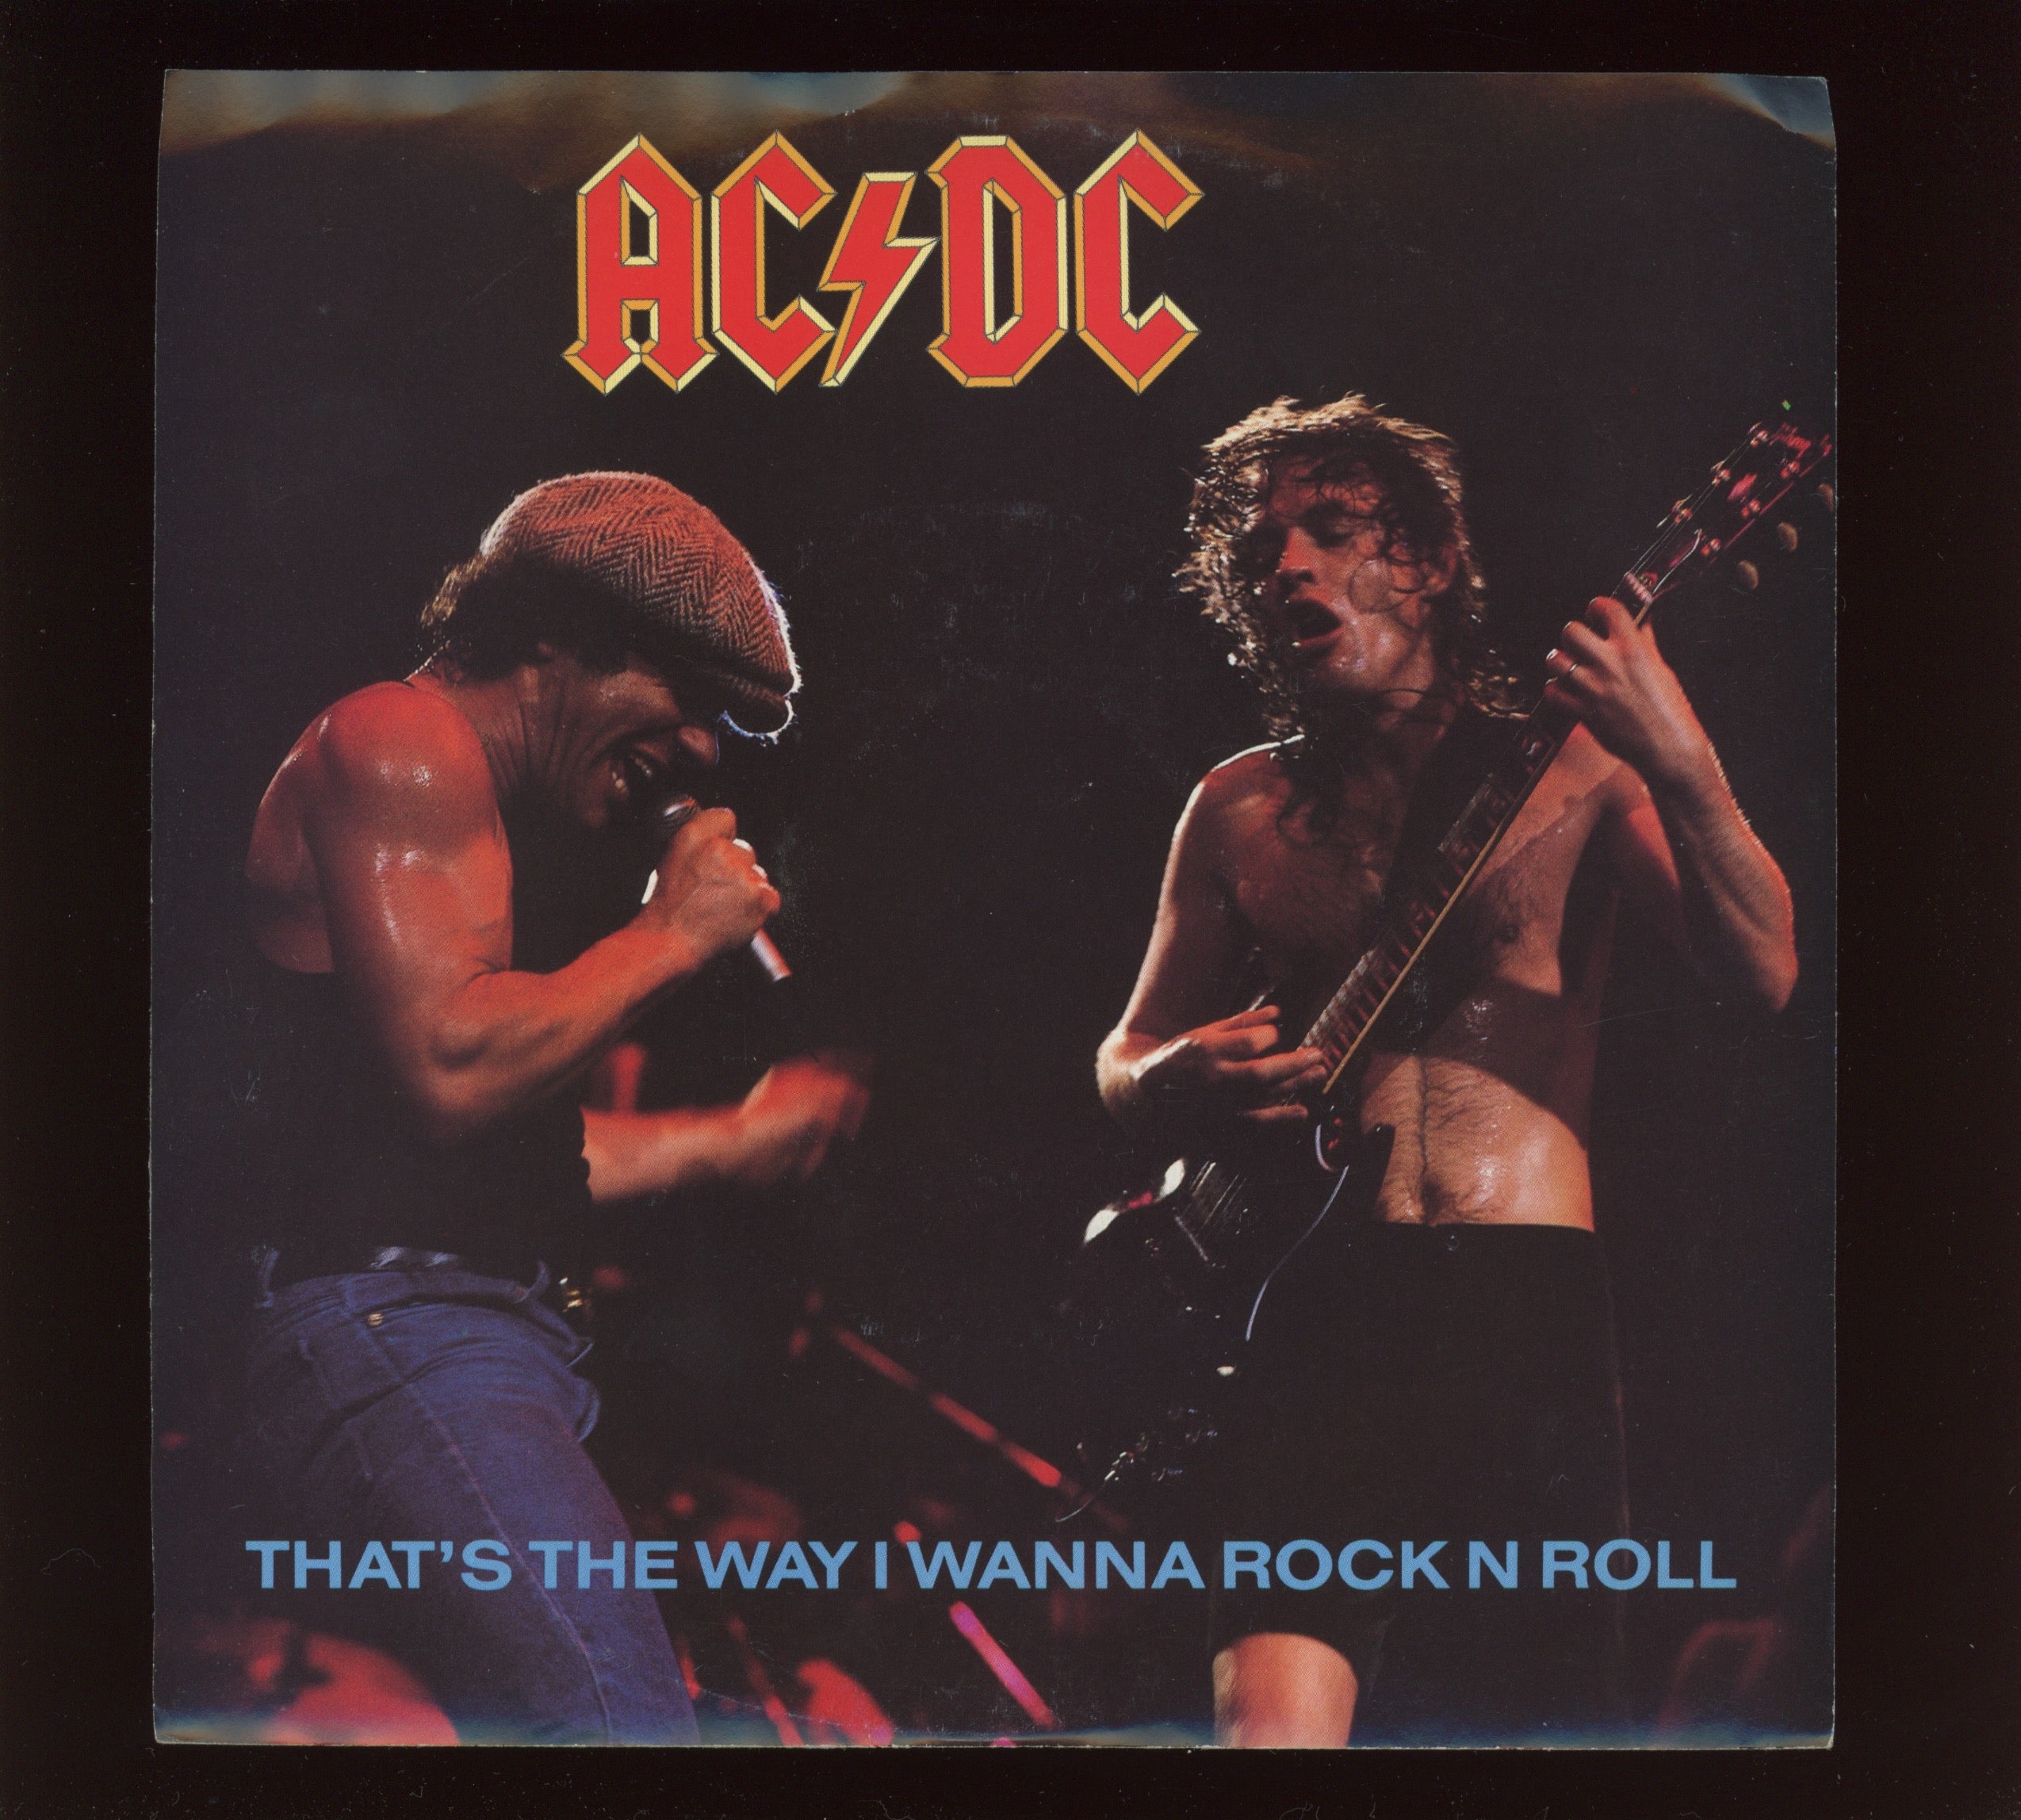 AC/DC - That's The Way I Wanna Rock N Roll on Atlantic With Picture Sleeve